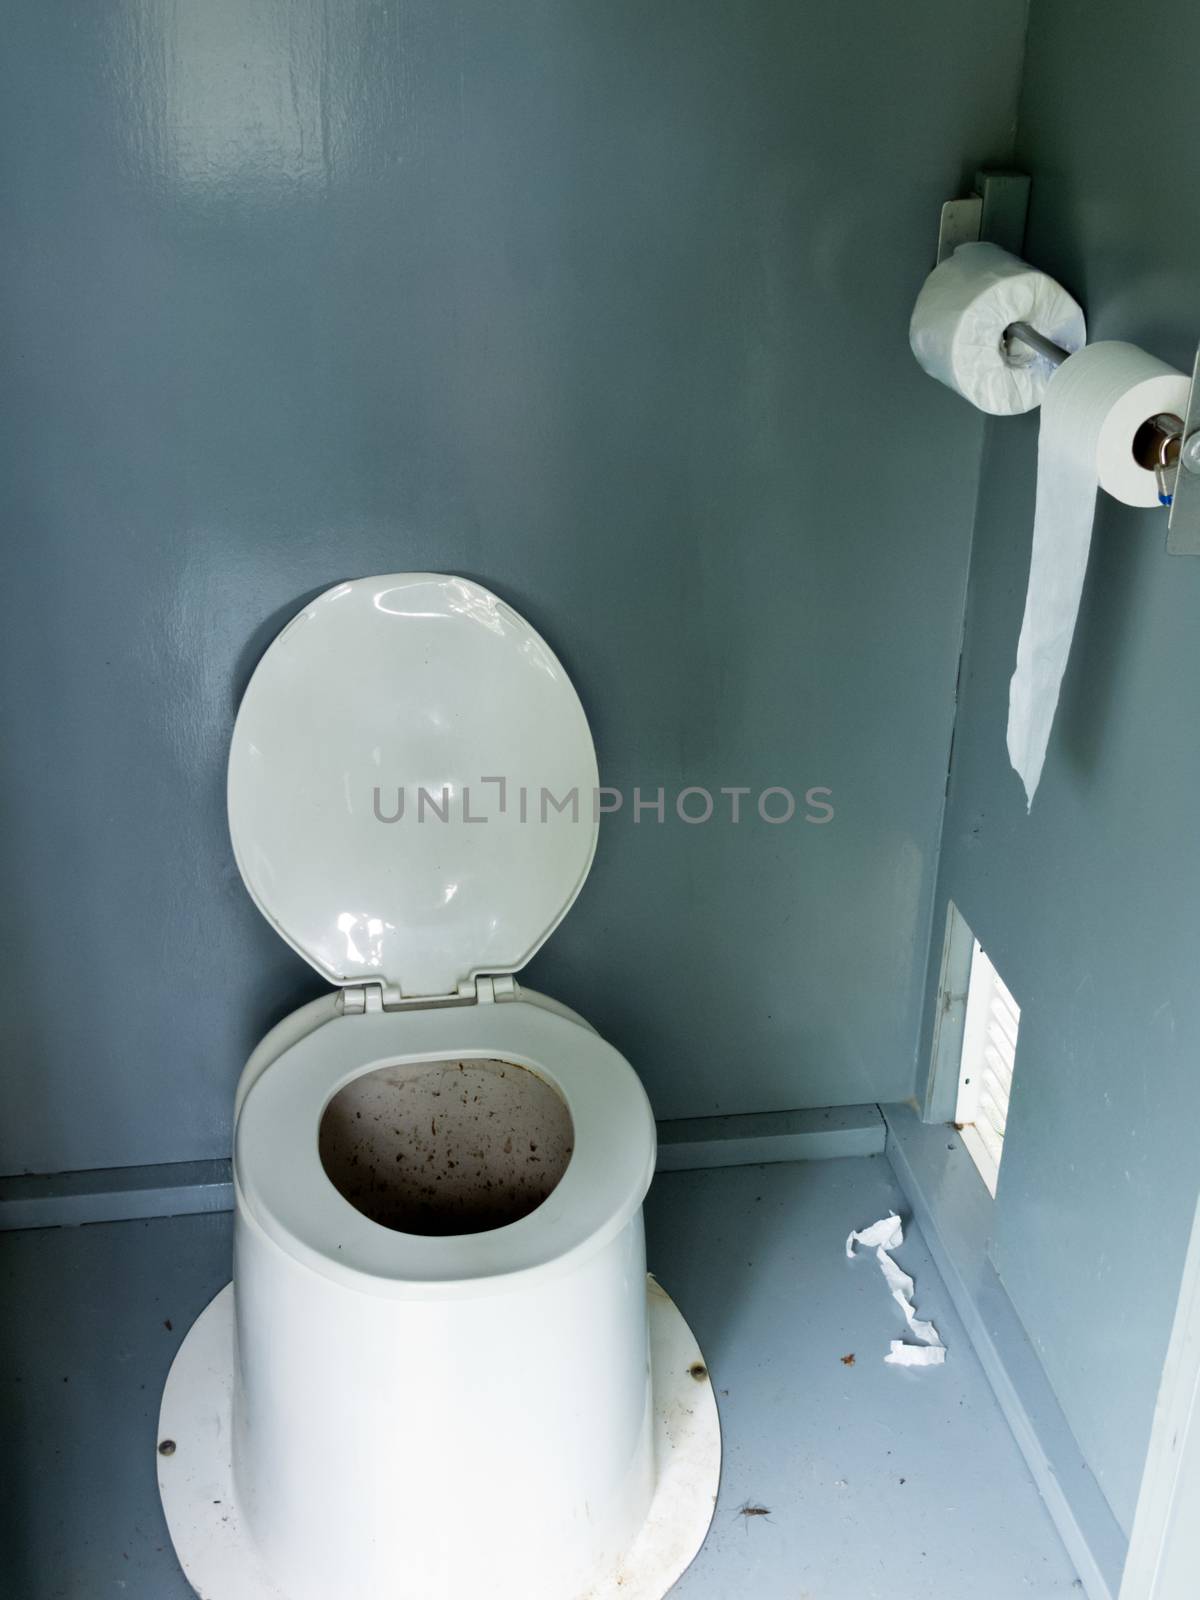 Filthy camp ground latrine outhouse inside toilet by PiLens